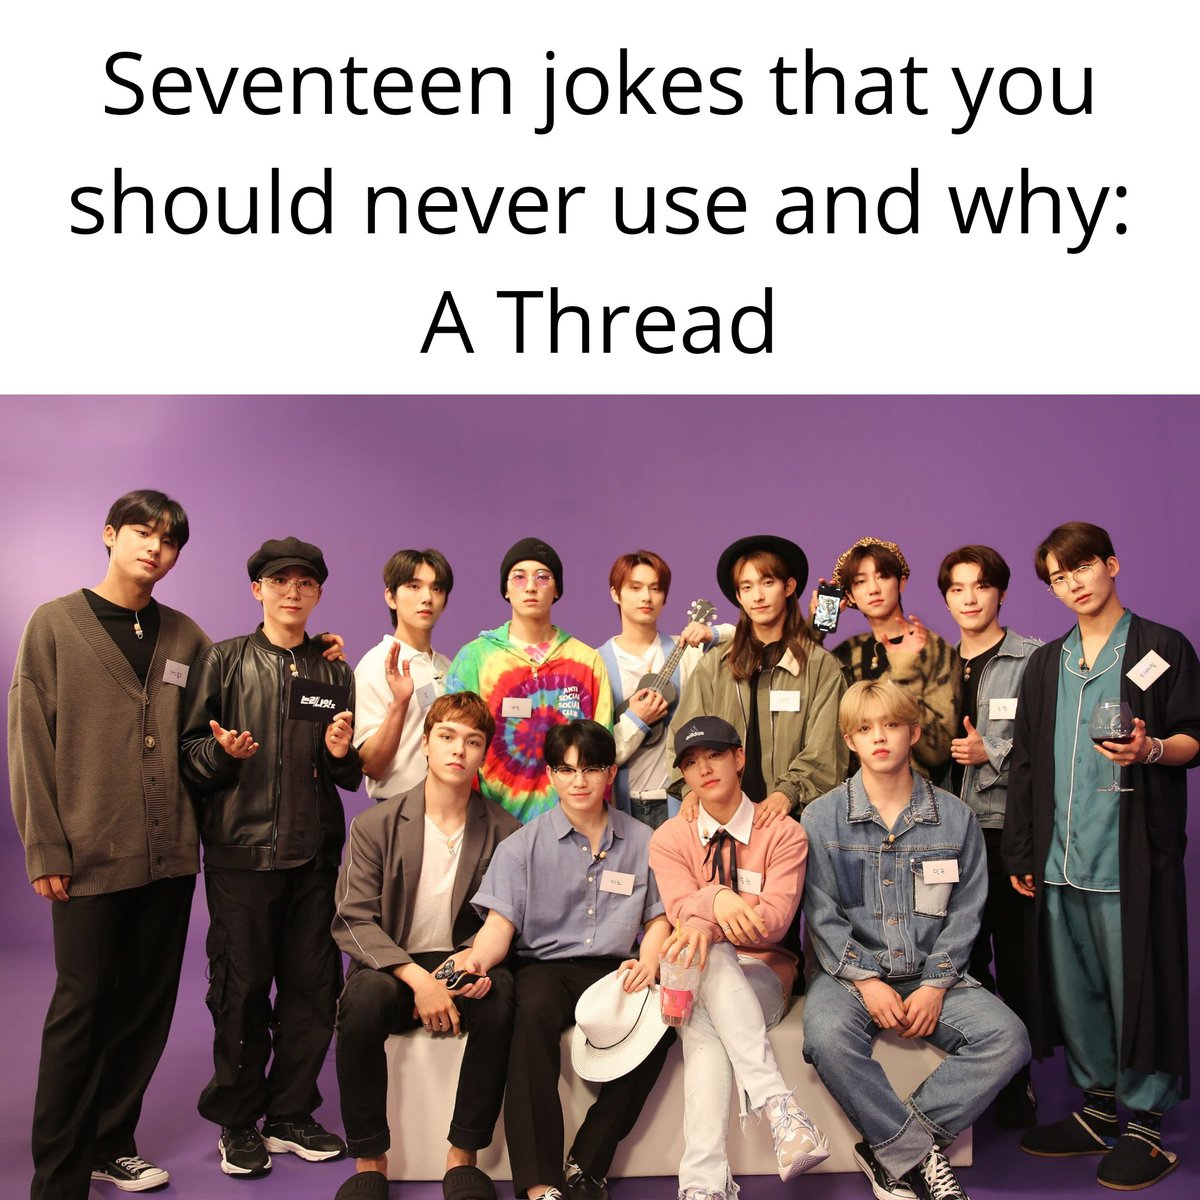 Seventeen jokes that you should never use and why: A Thread